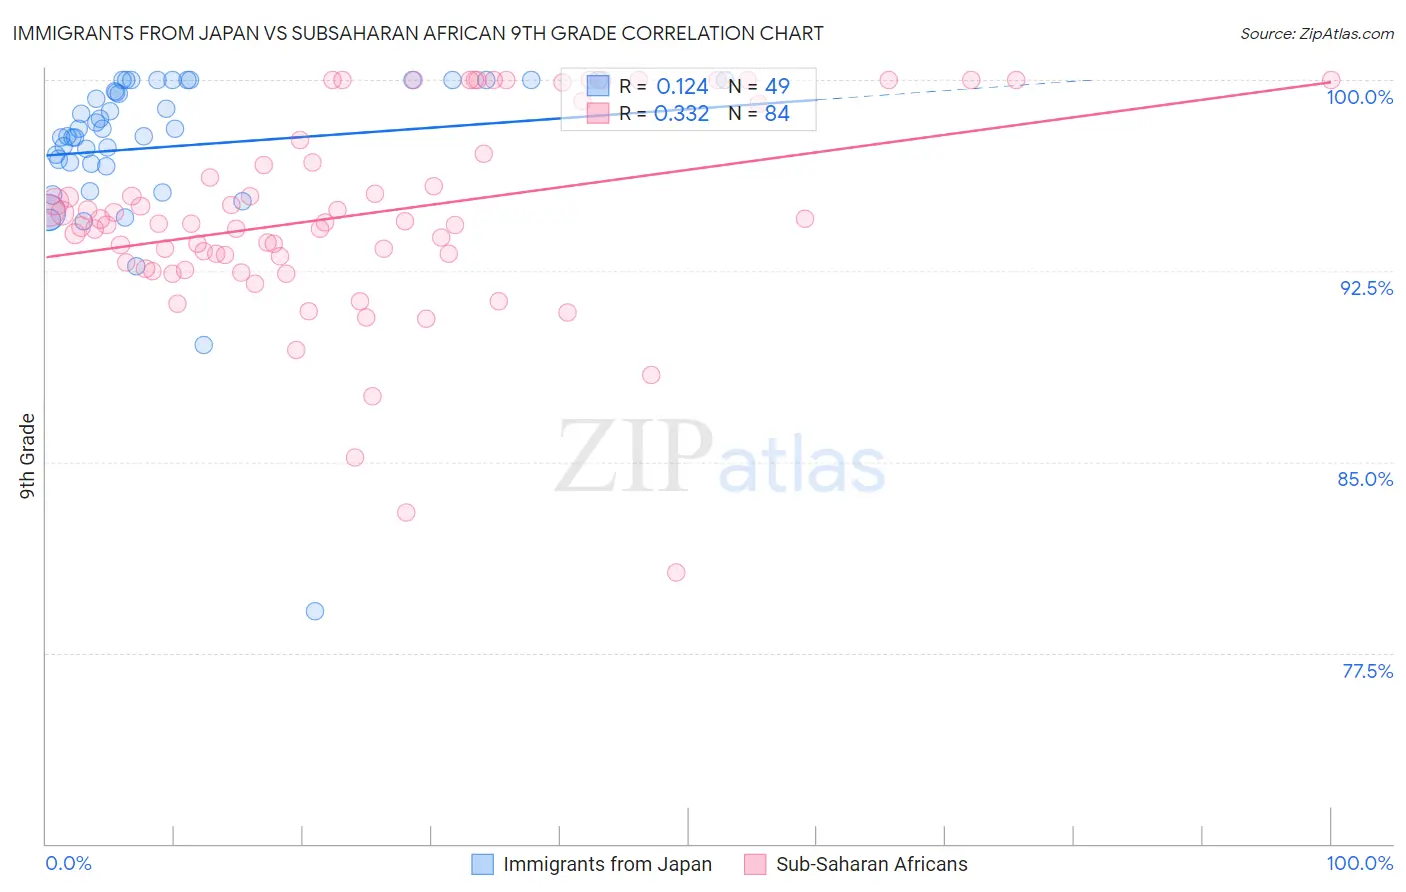 Immigrants from Japan vs Subsaharan African 9th Grade